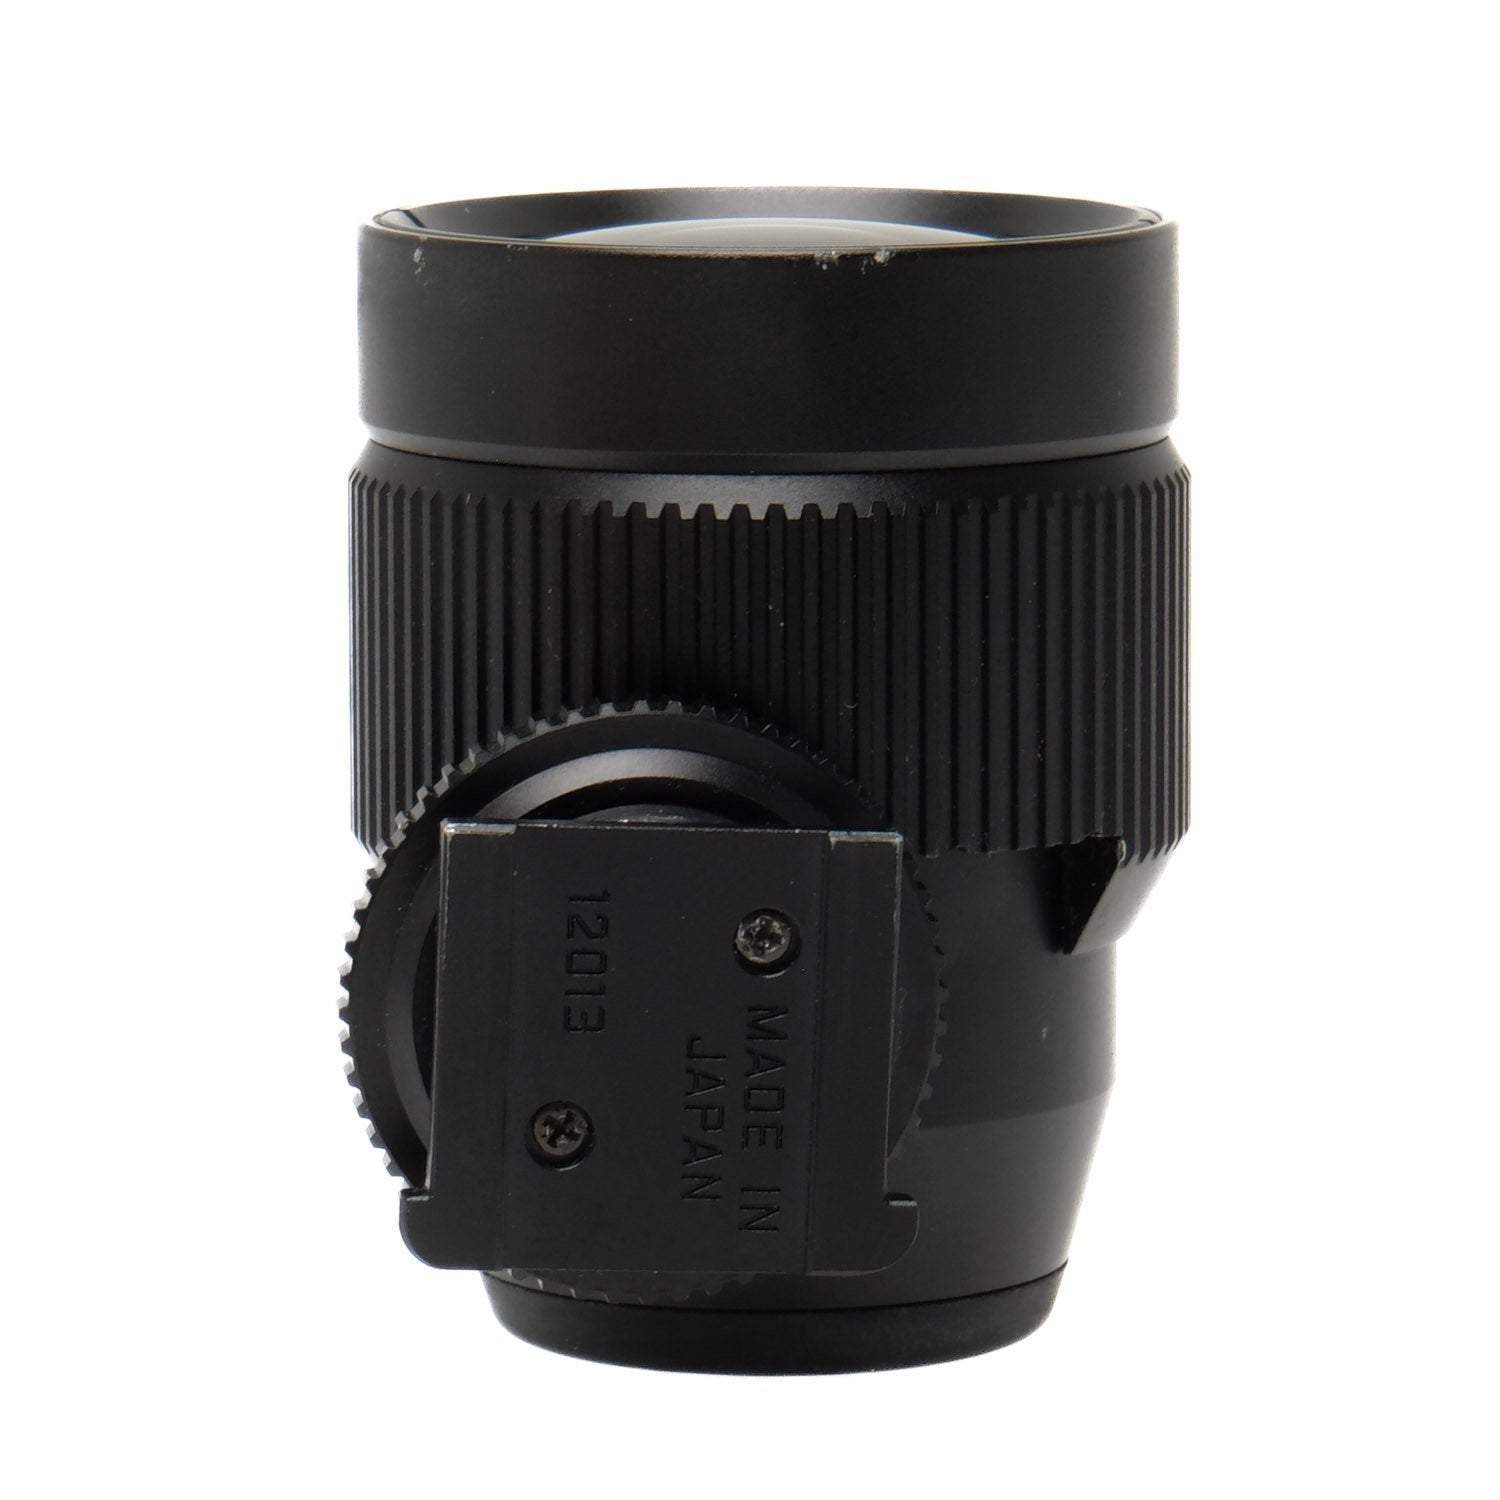 Leica Variable Optical View Finder 12013, Case (9)